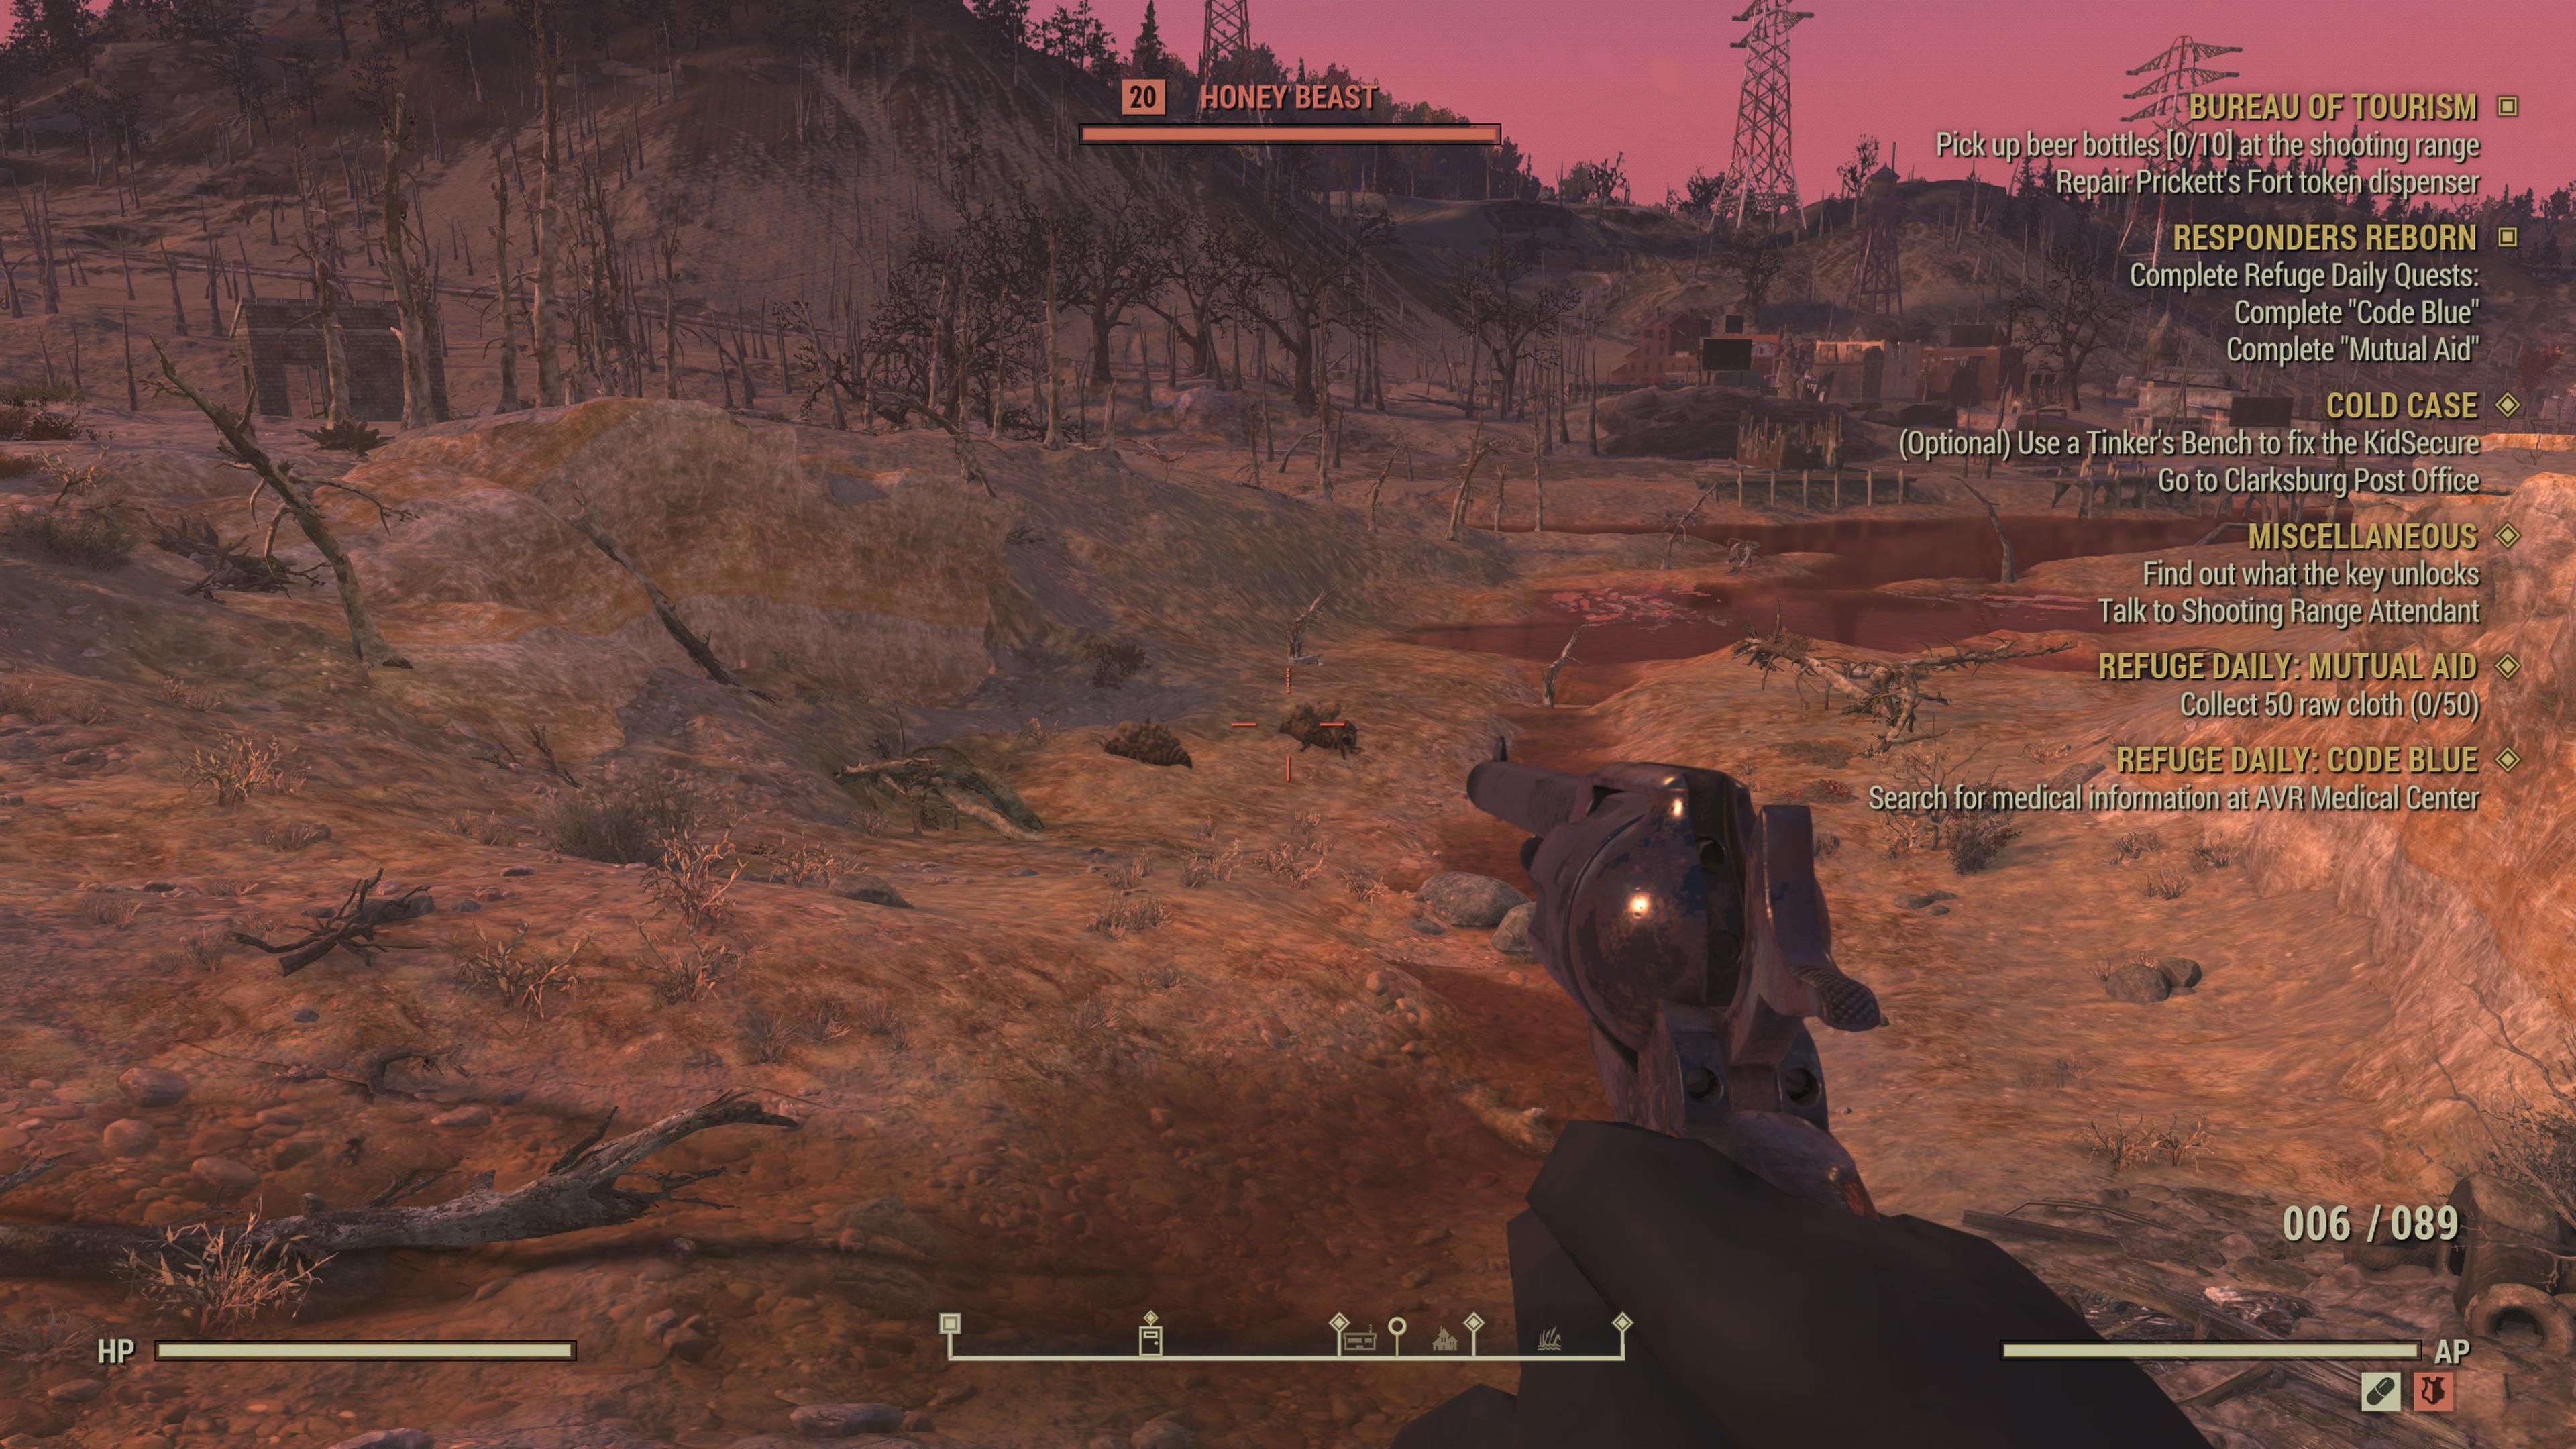 Two Honeybeasts wandering the Toxic Valley in Fallout 76